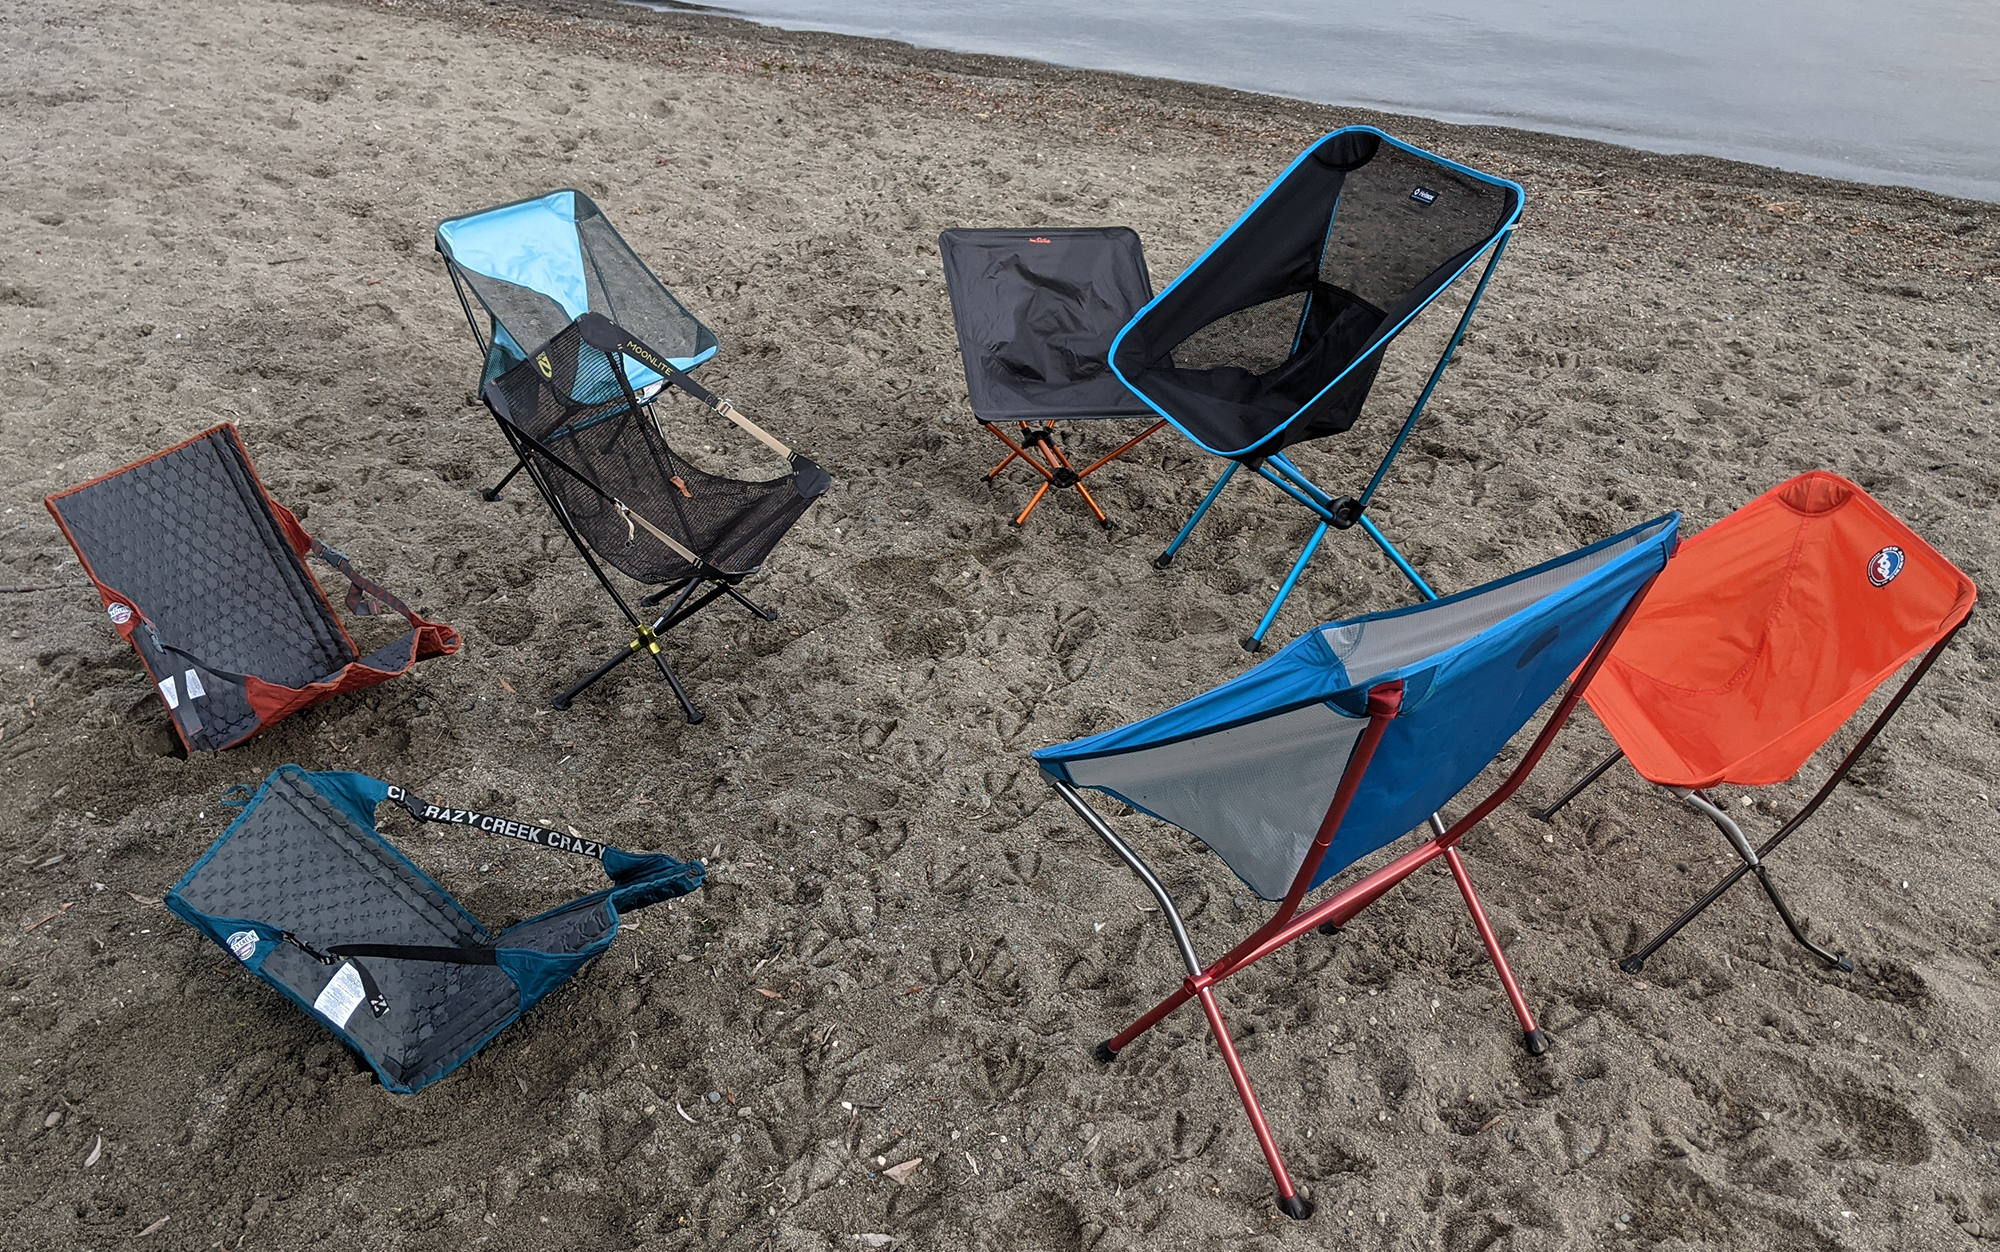 The best backpacking chairs sit on a sandy beach.